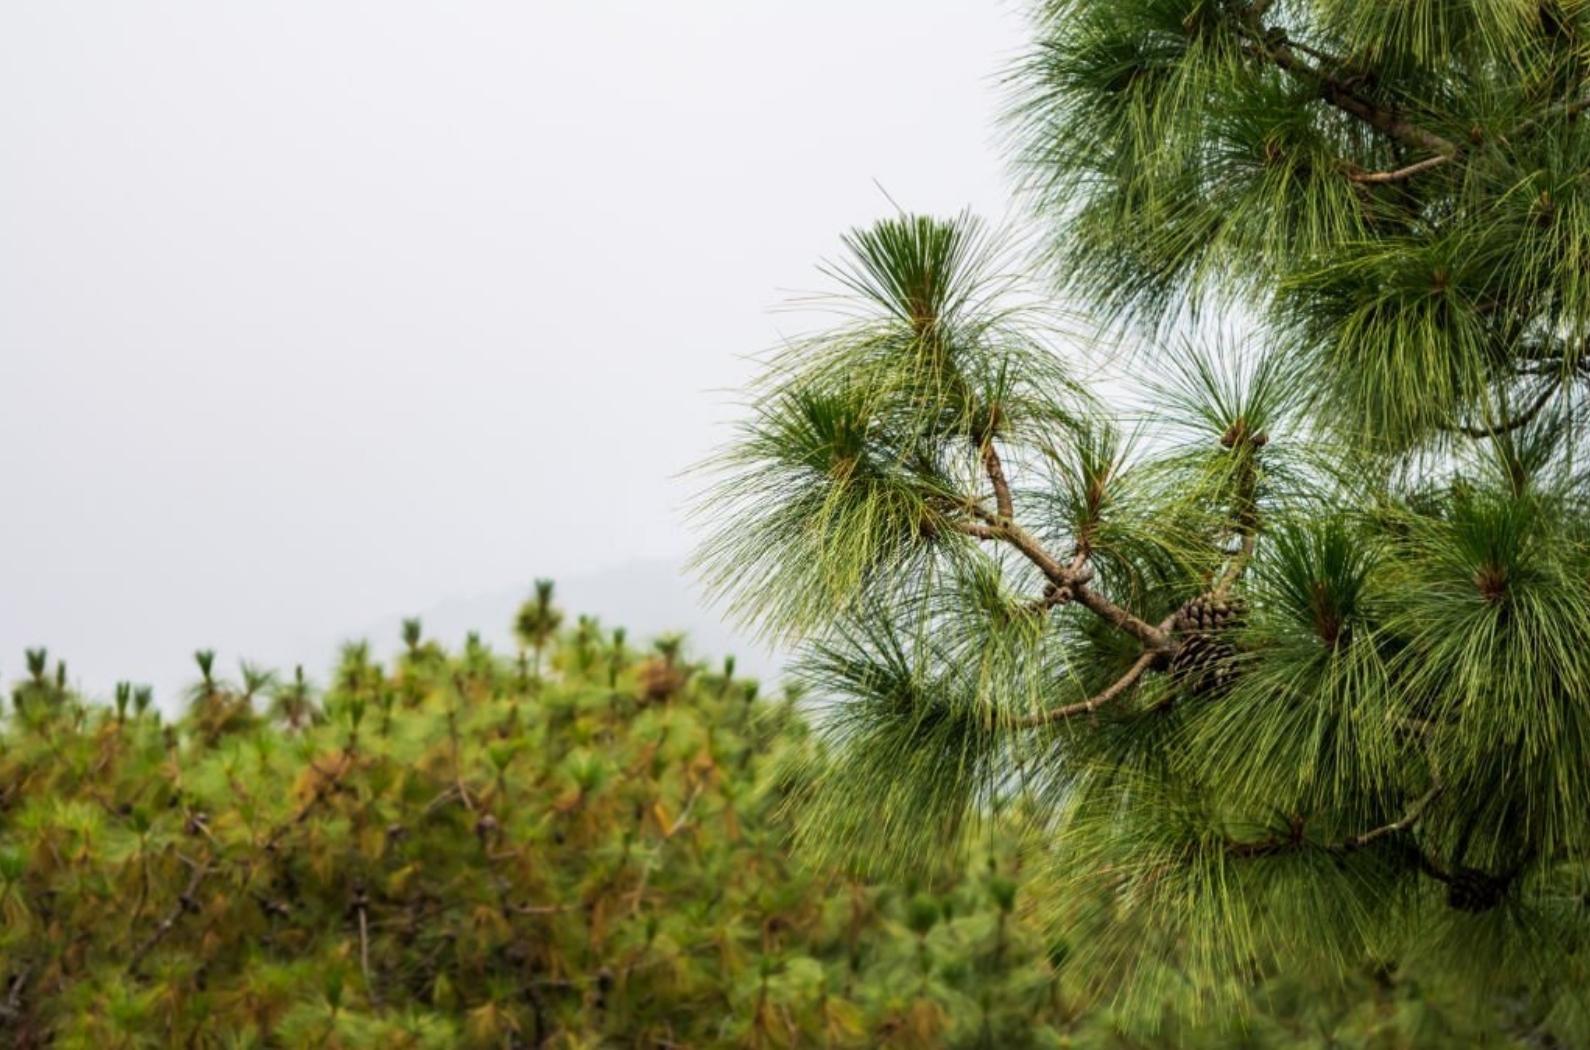 Pine tree at Shillong View Point, Laitkor Peak in India.